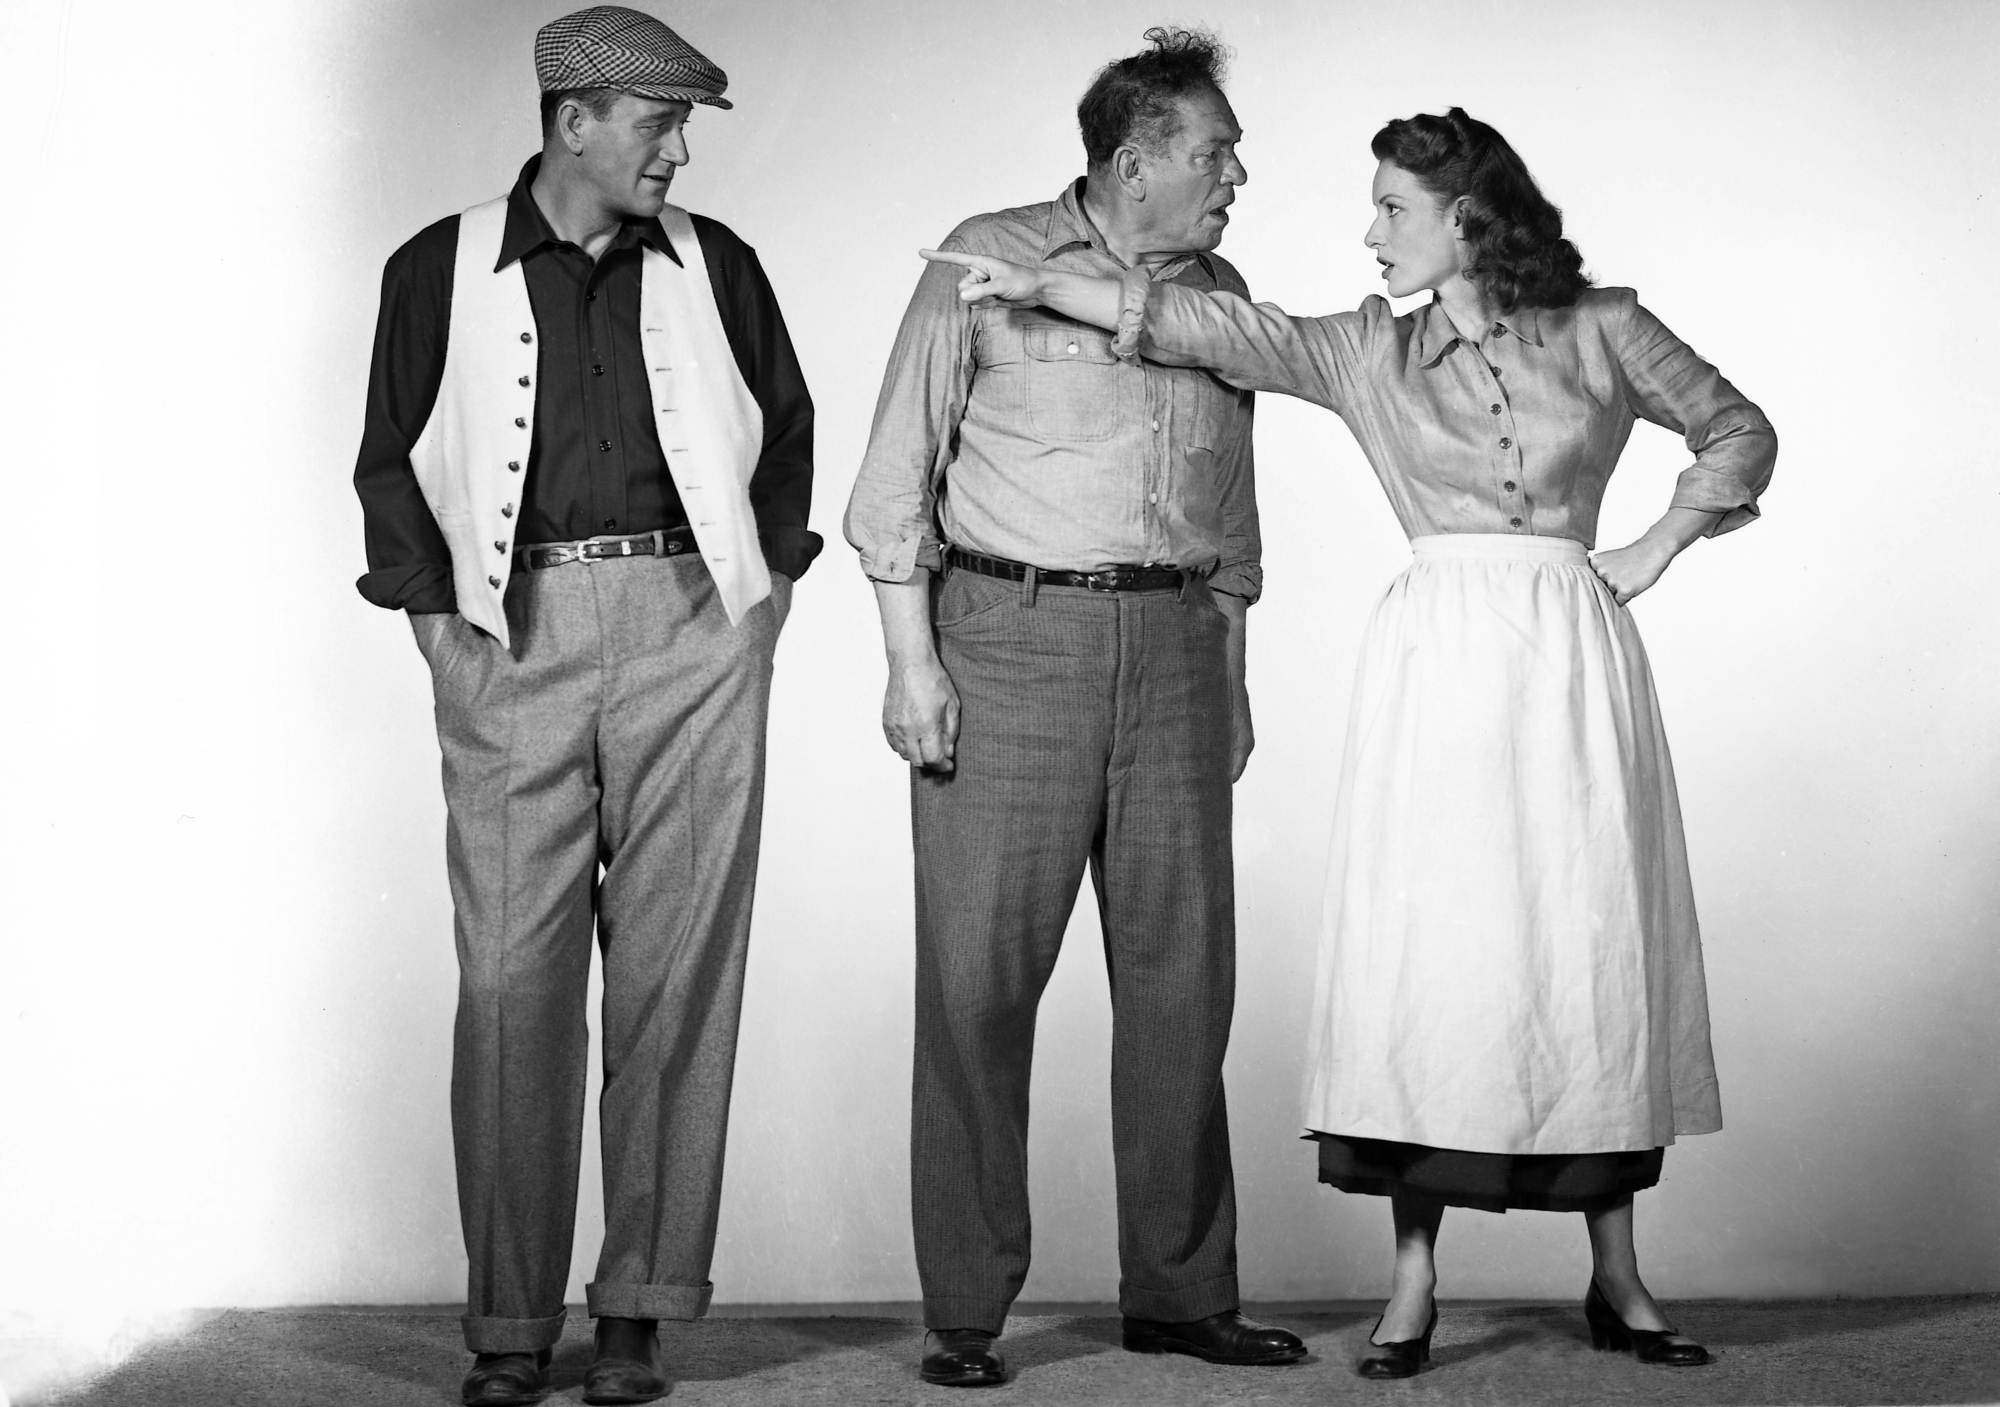 'The Quiet Man' John Wayne as Sean Thornton, Victor McLaglen as Squire 'Red' Will Danaher, and Maureen O'Hara as Mary Kate Danaher. O'Hara is pointing at Wayne, while McLaglen is looking at O'Hara.